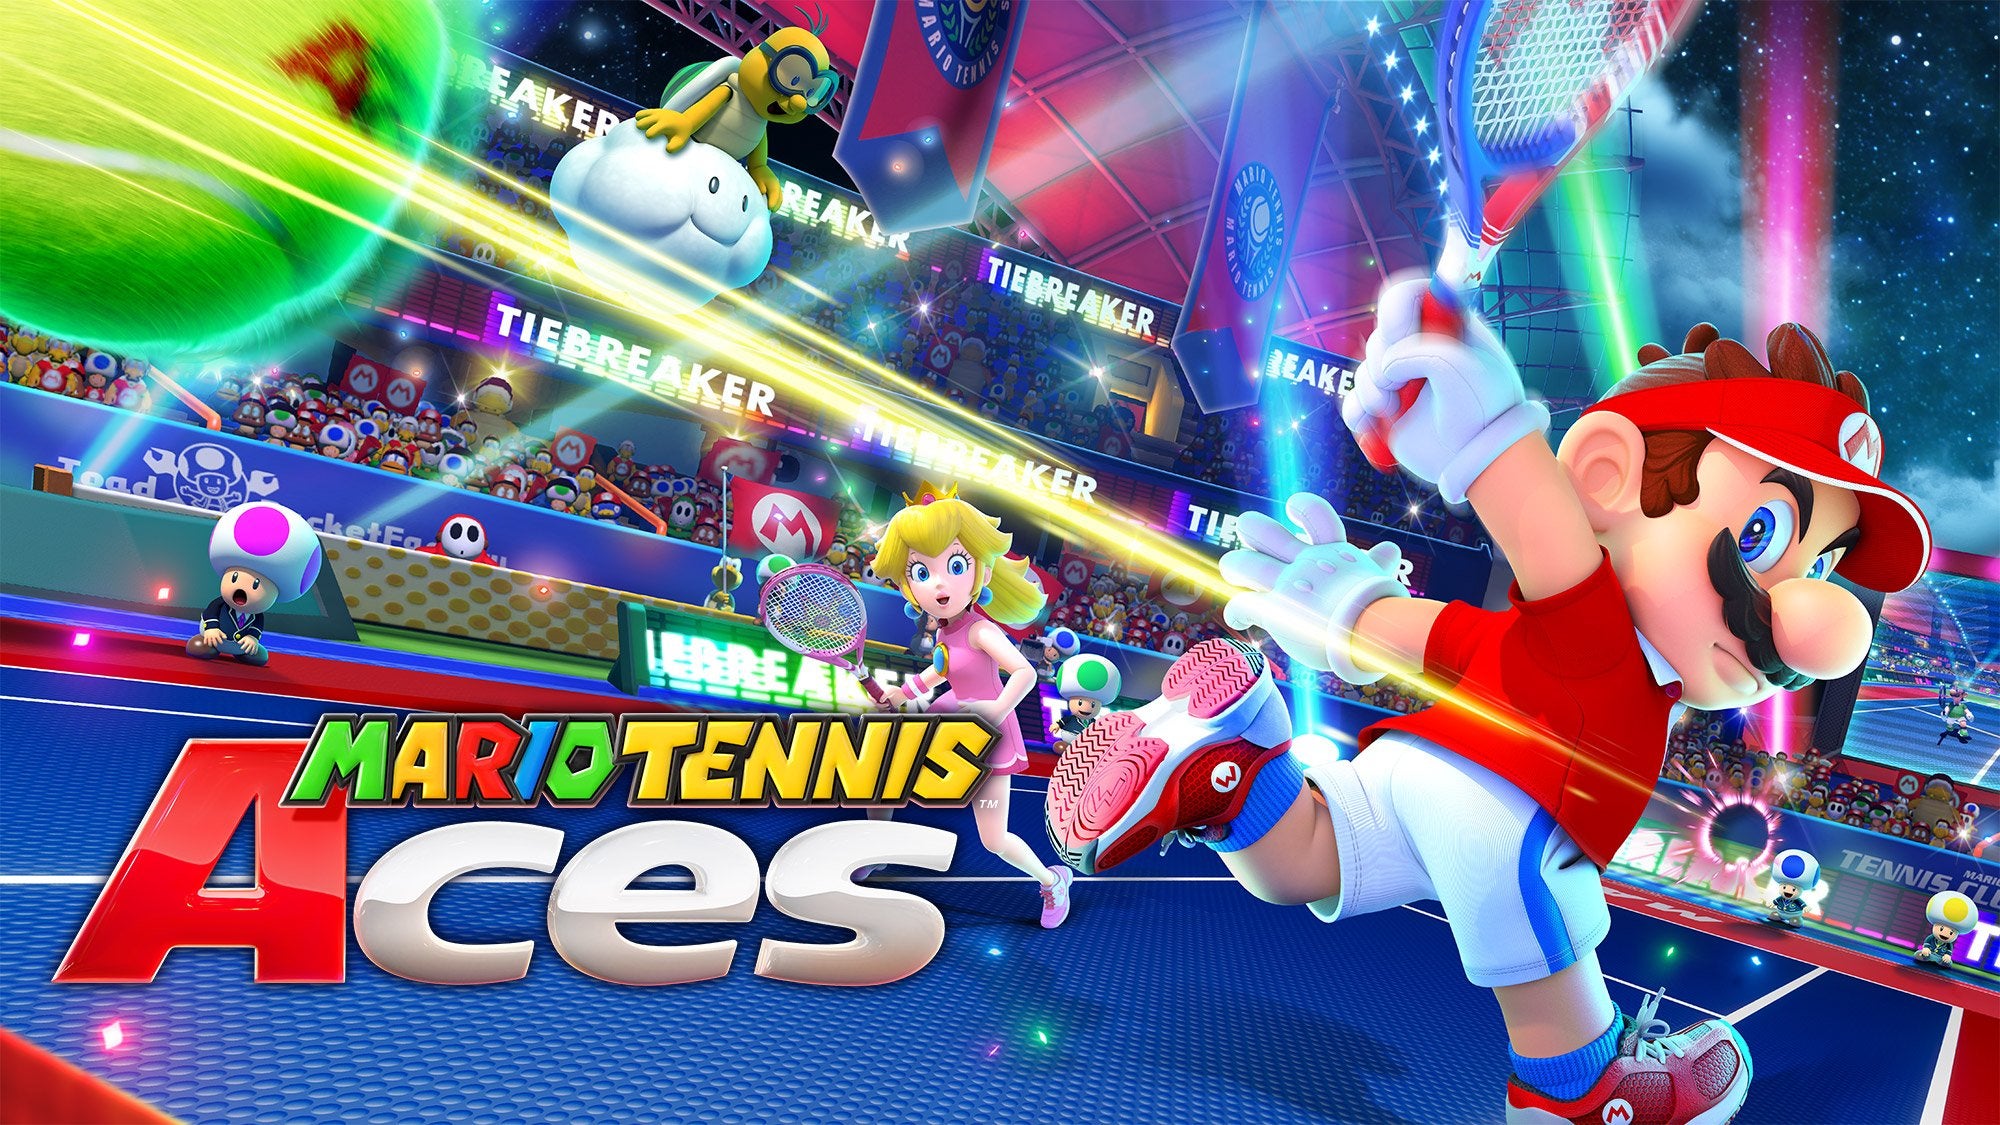 Image for Get a Nintendo Switch with Mario Tennis Aces and extra Joy-Cons for £340